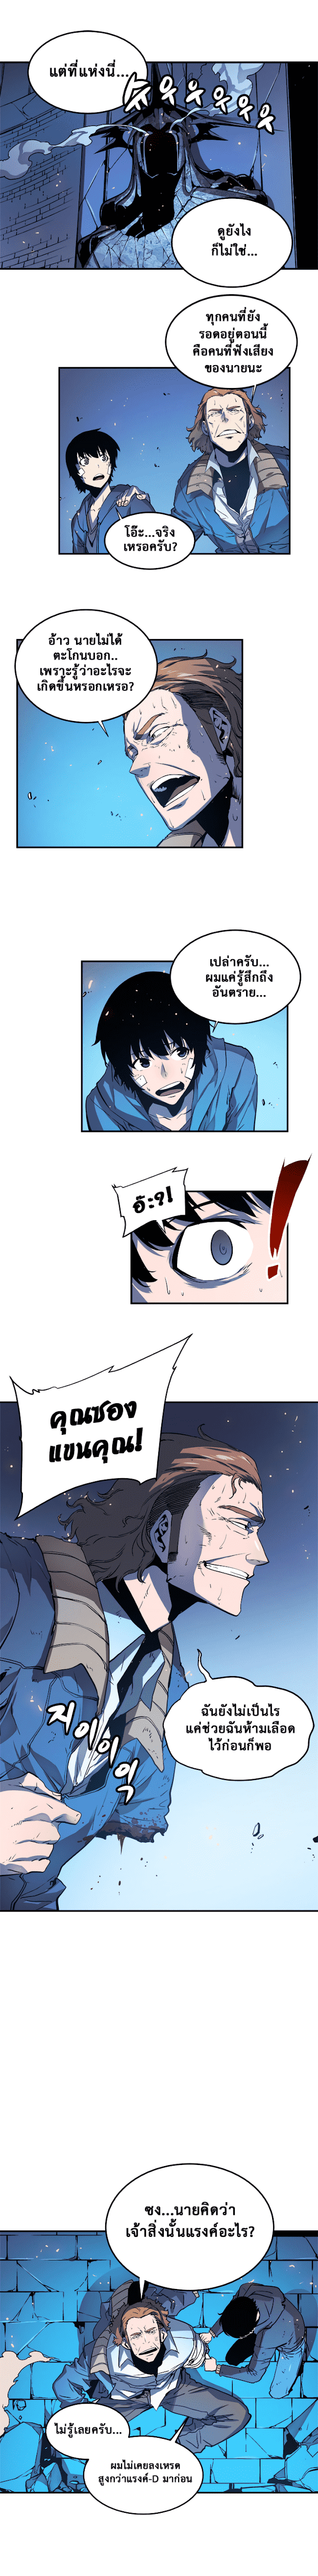 Solo-Leveling0018.png